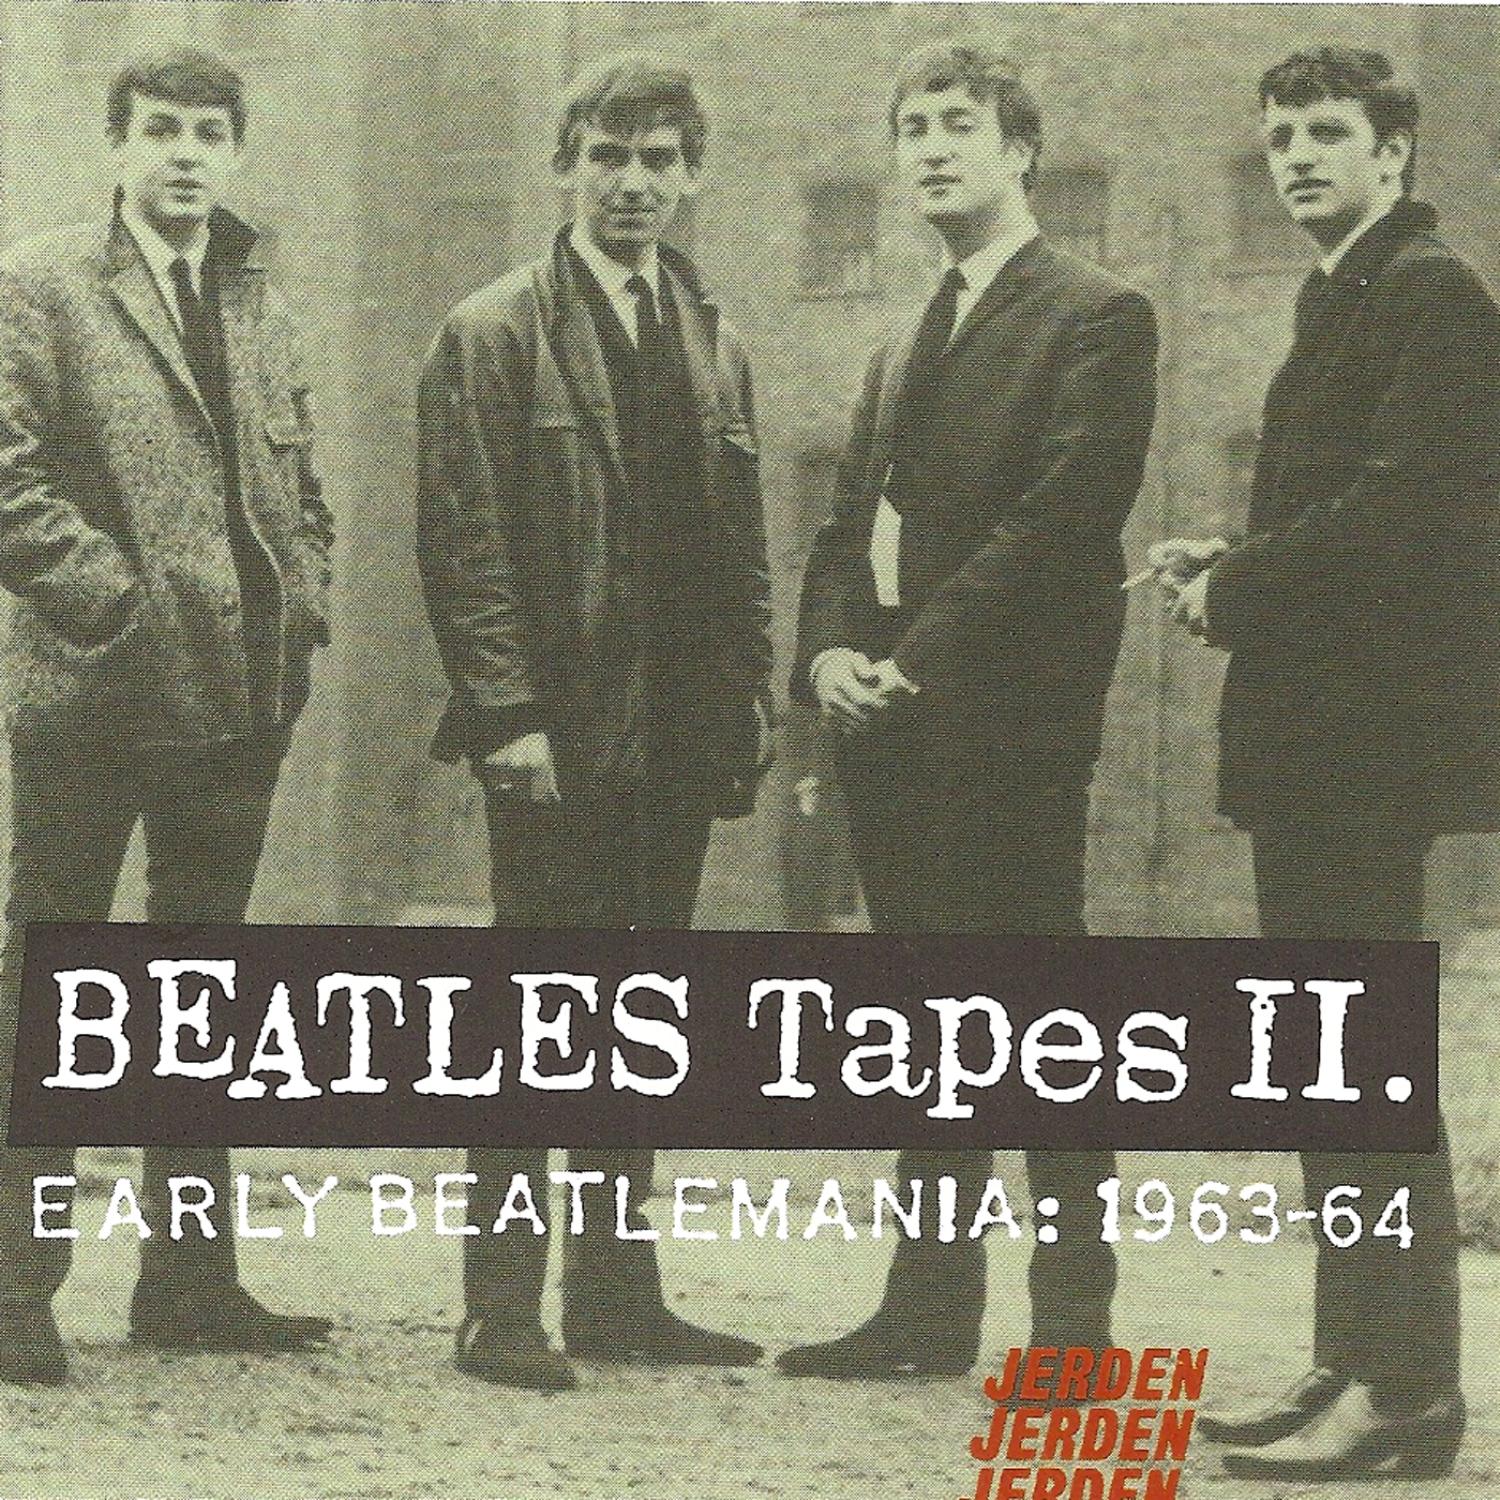 Beatles Tapes, Volume 2- Early Beatlemania 1963-64